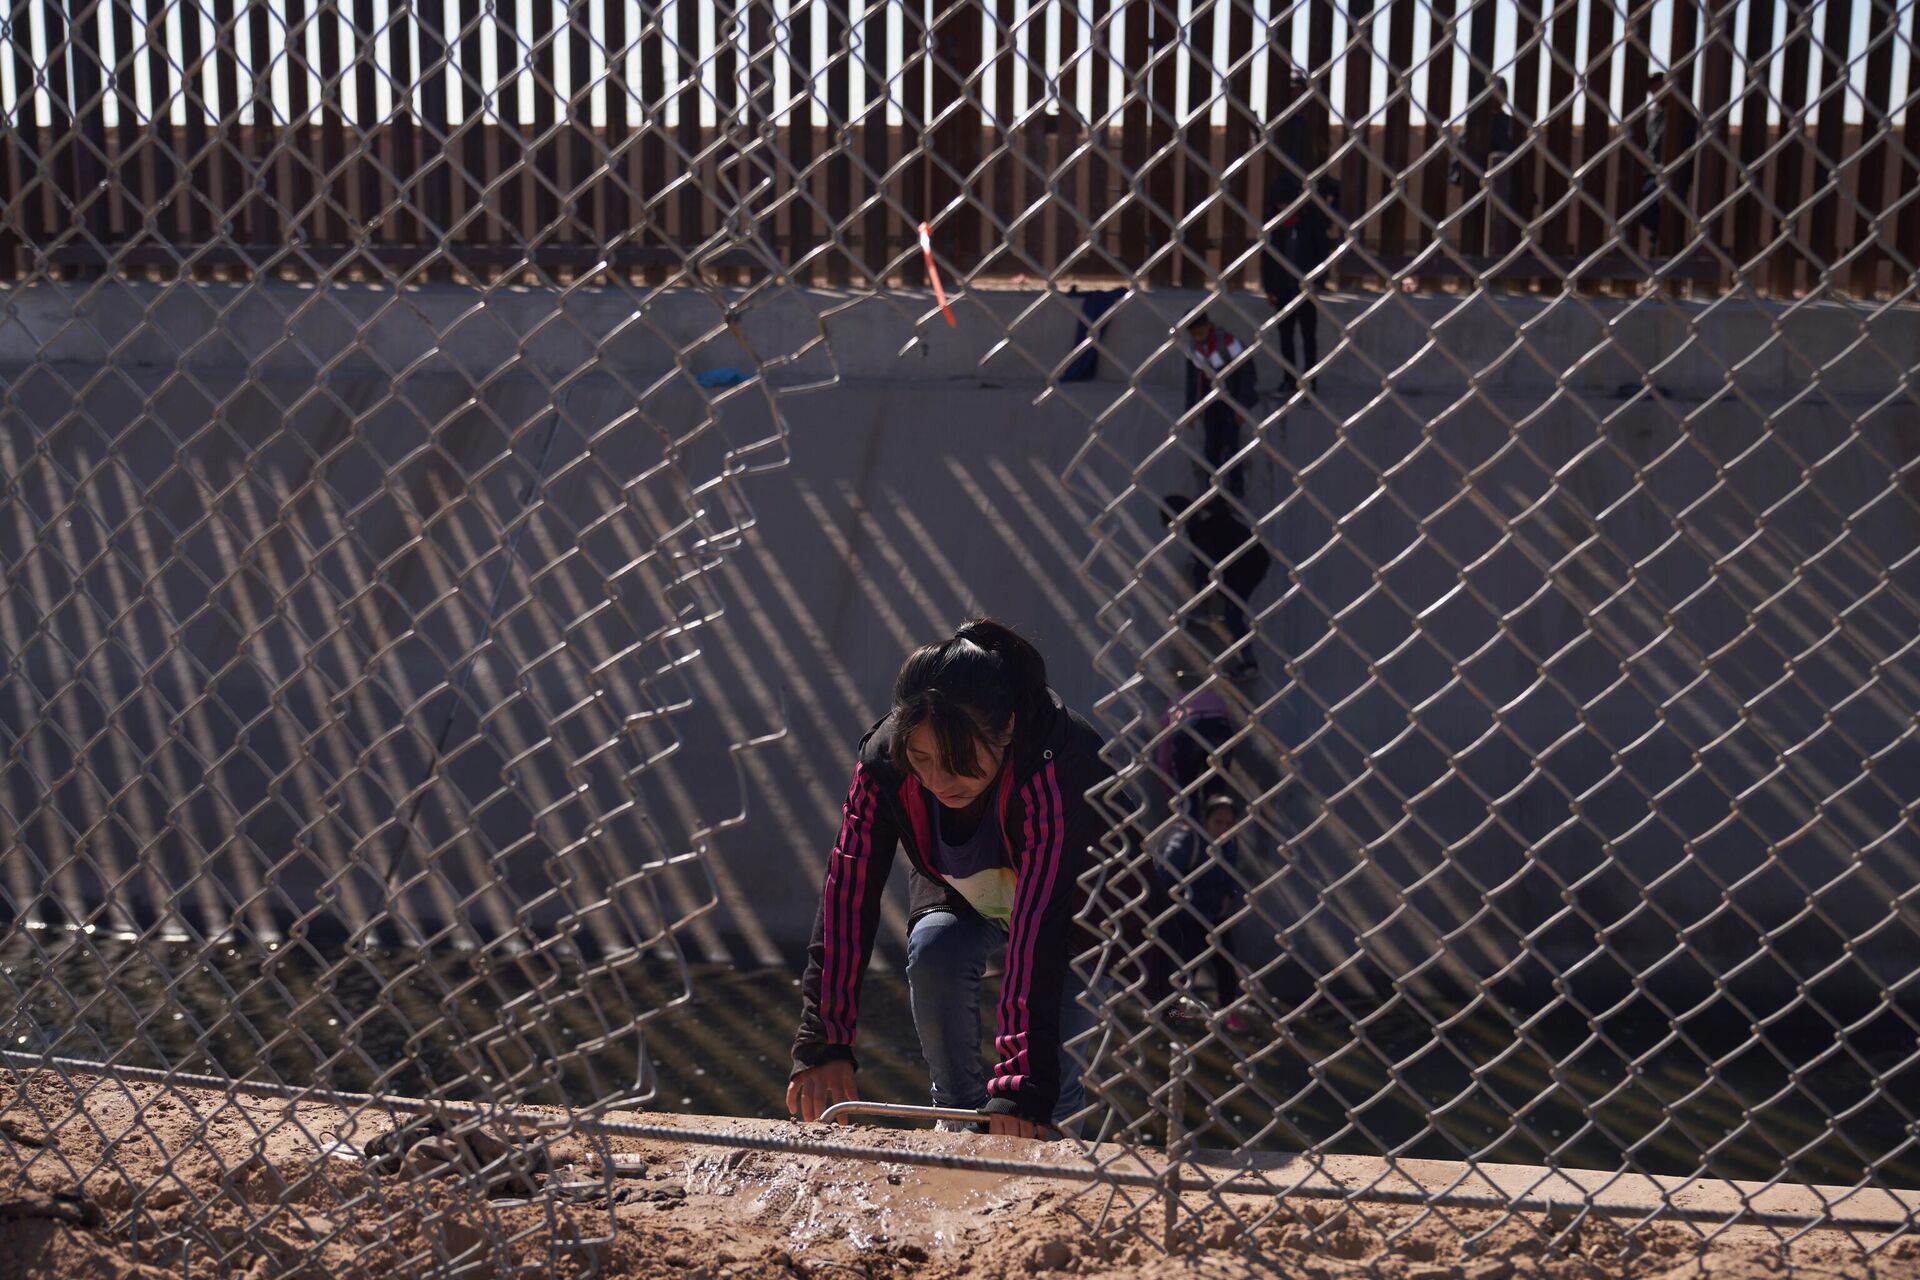 Migrants illegally cross into the United States from Mexico via a hole cut in the border fence in El Paso, Texas, US on December 21, 2022.  - Sputnik International, 1920, 28.12.2022